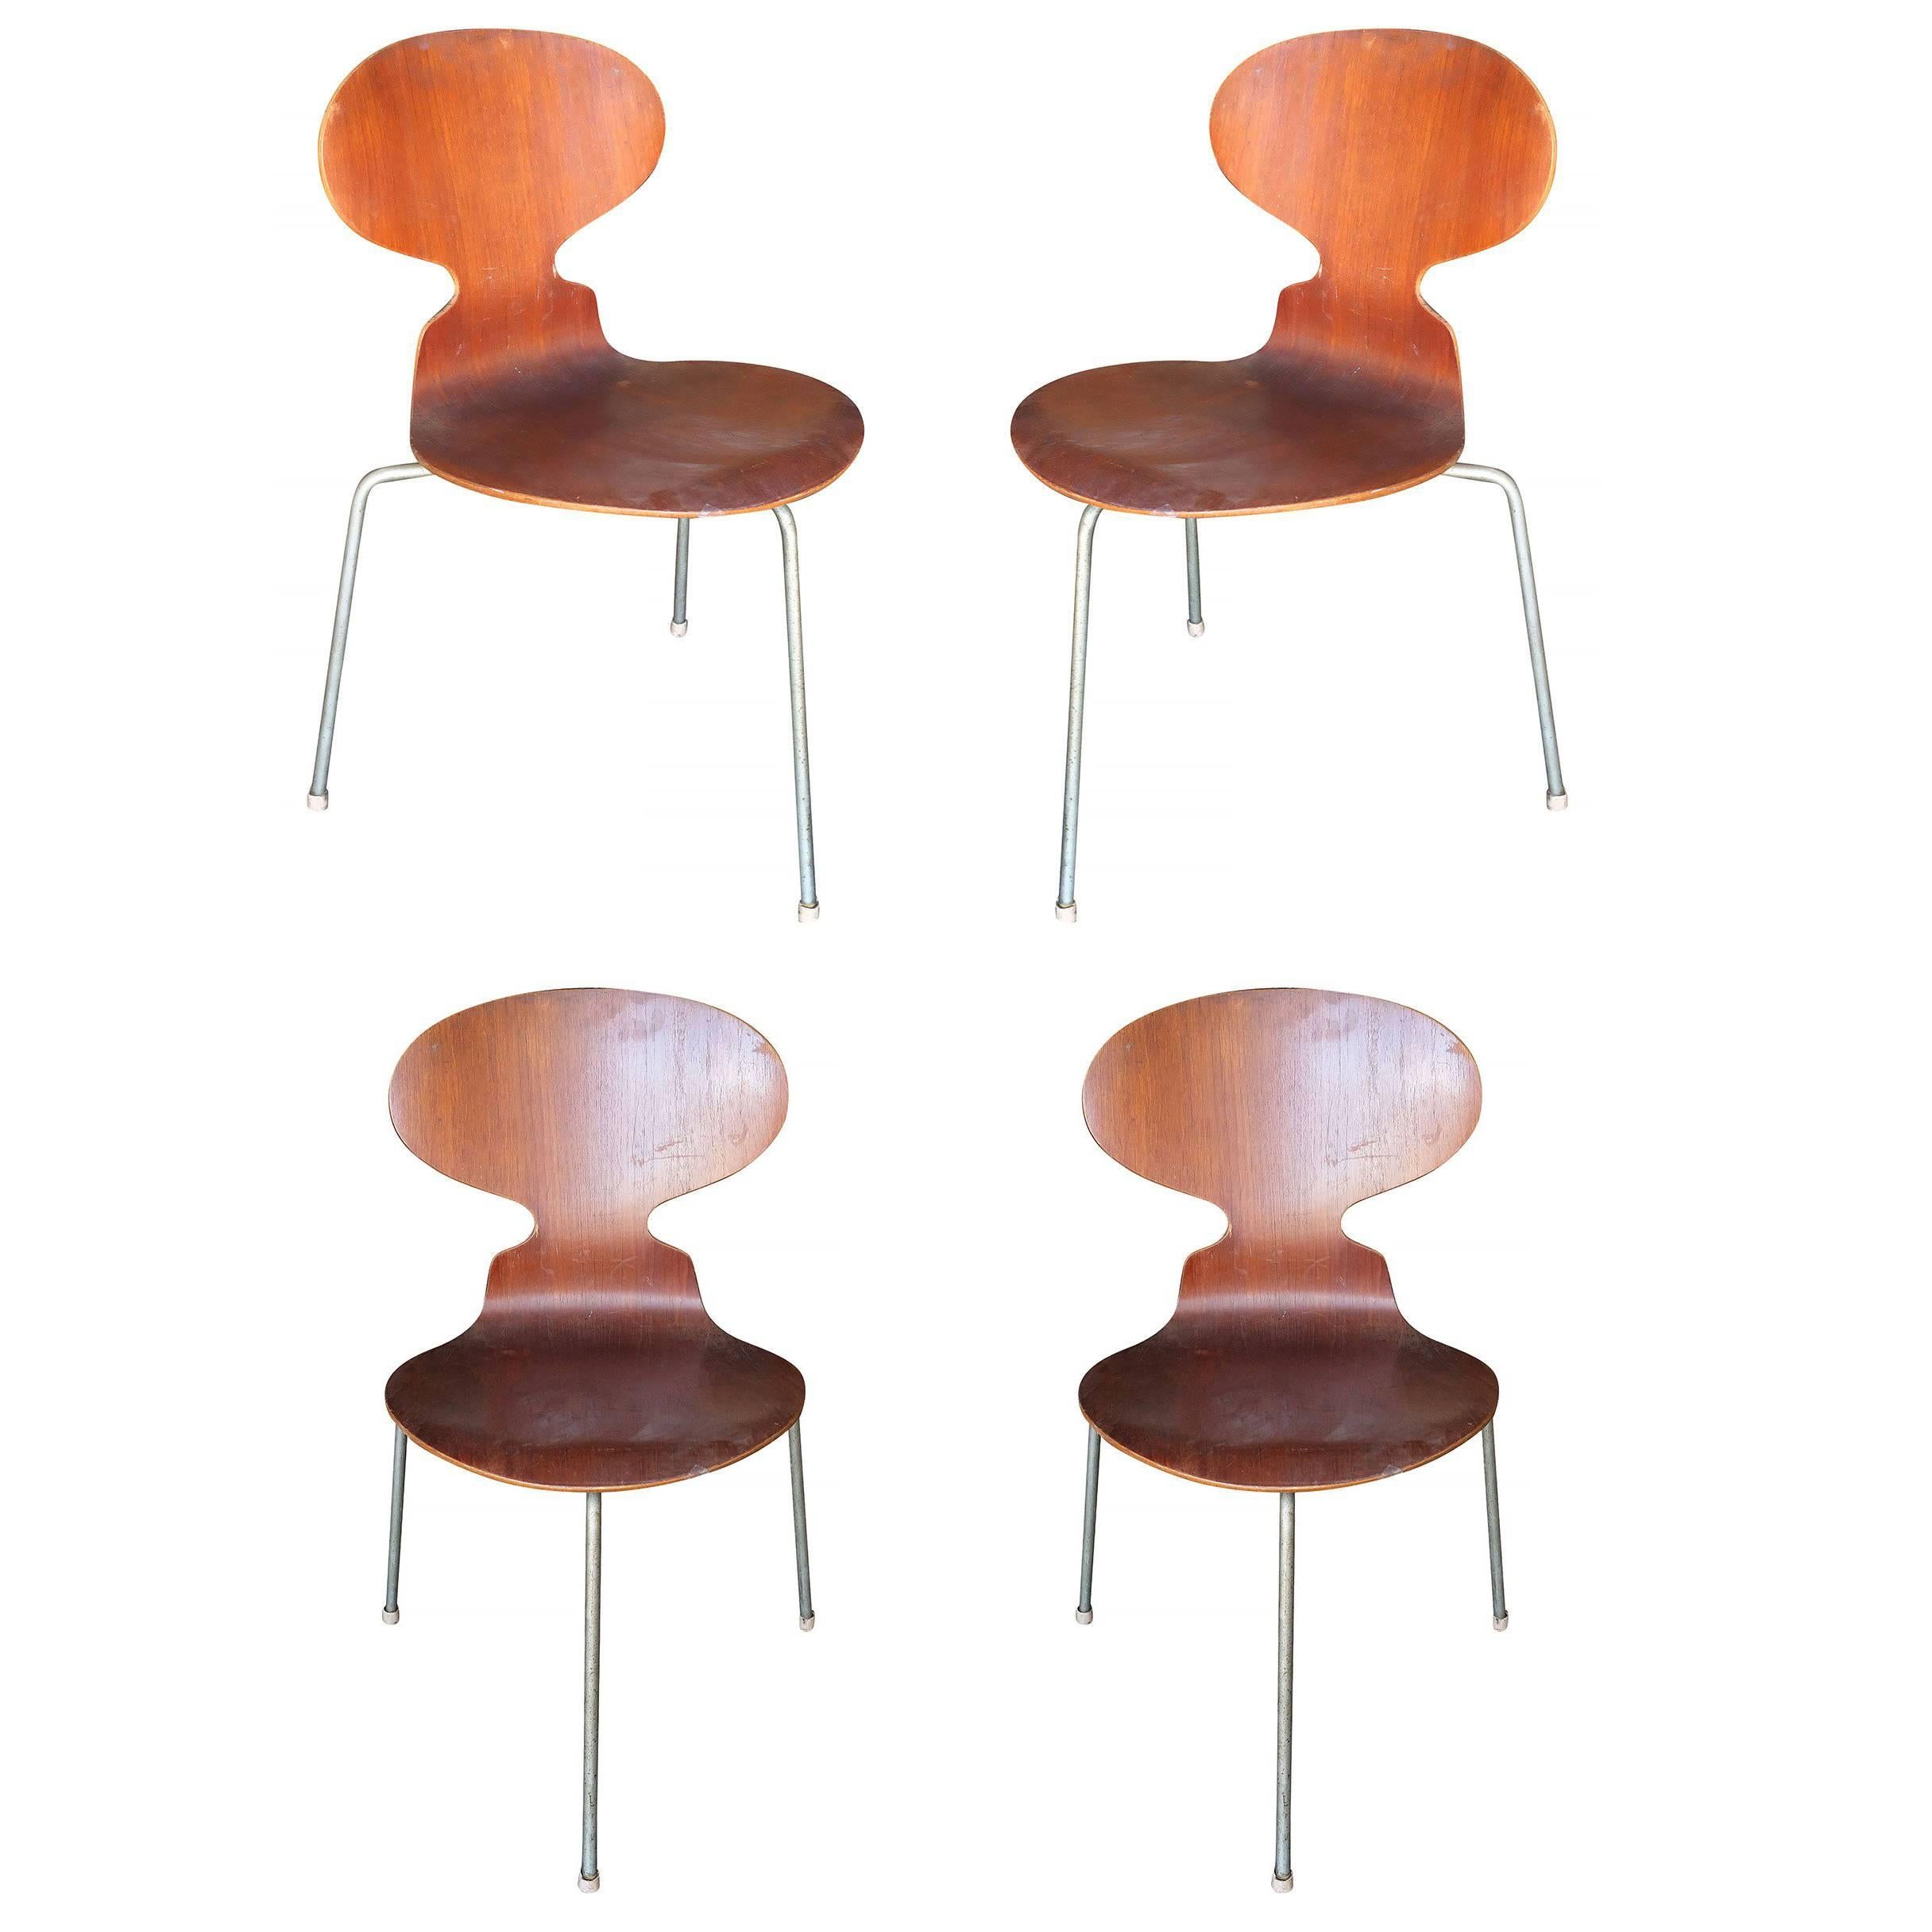 Arne Jacobsen "Ant" Side Chairs, Set of Four For Sale